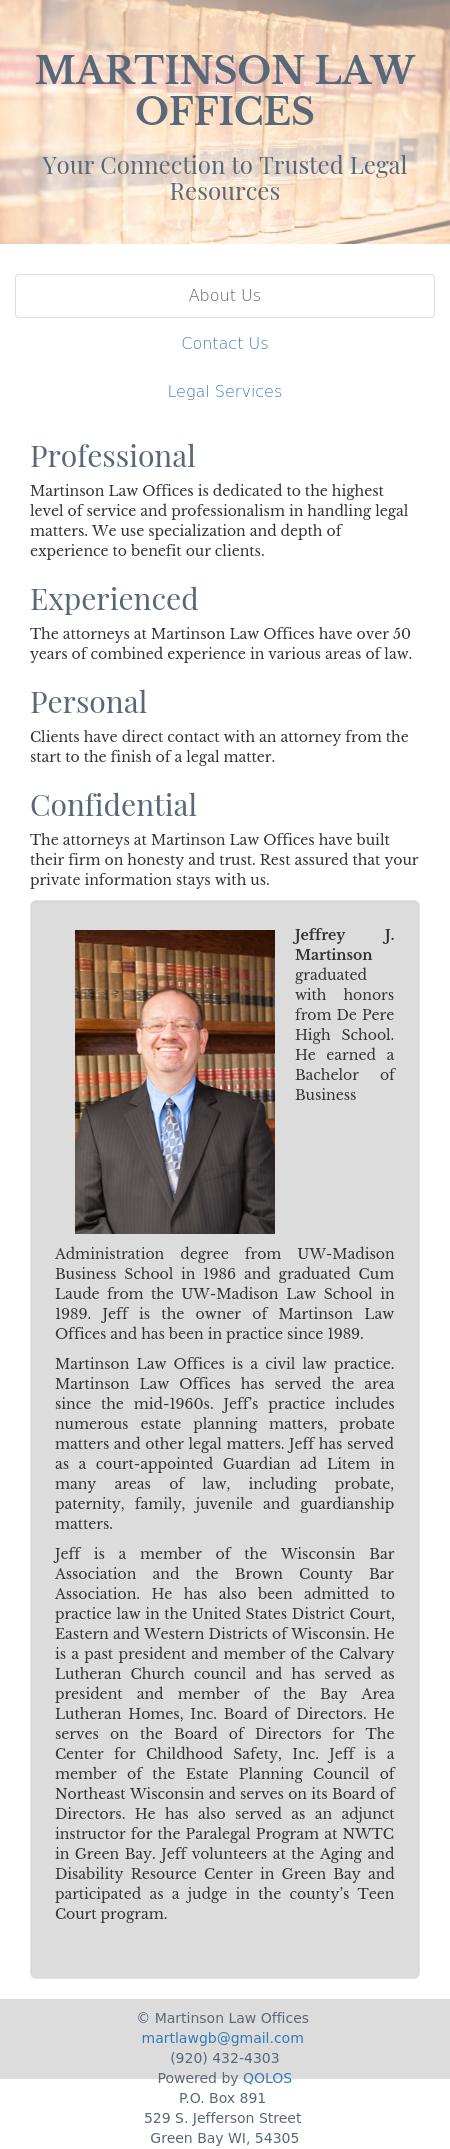 Martinson Law Offices - Green Bay WI Lawyers